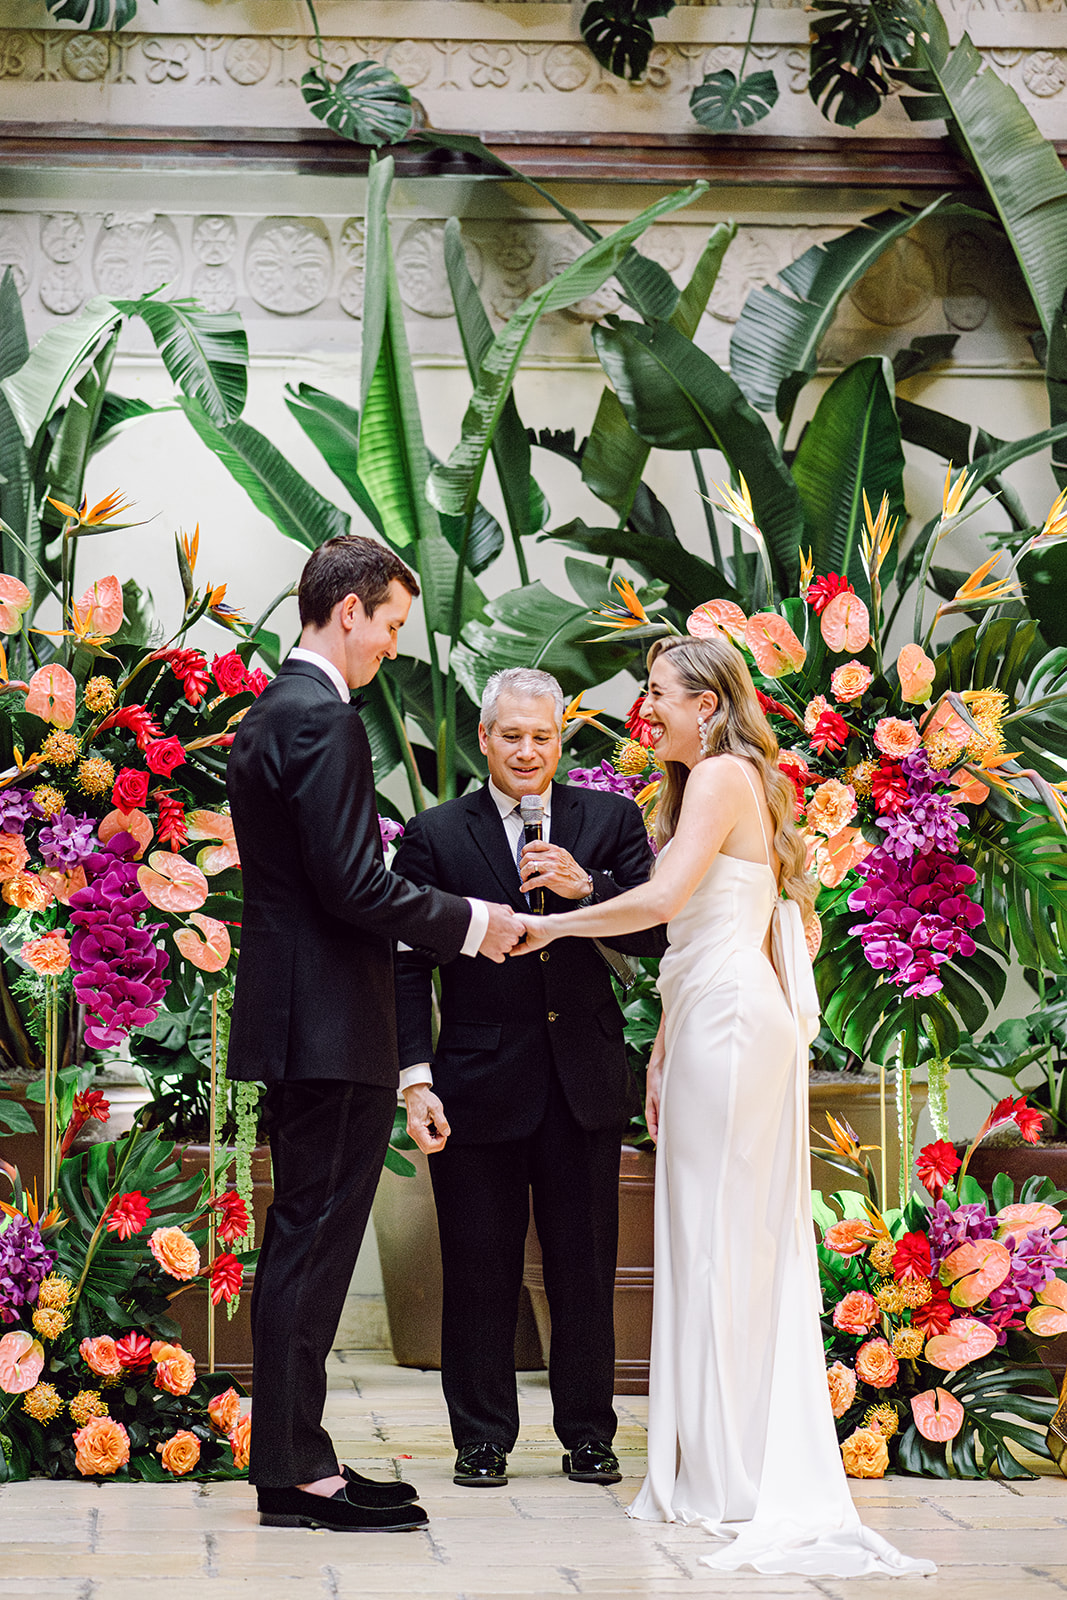 Bride places wedding ring on finger of groom during ceremony at Mayfair House Hotel & Garden in Miami on wedding day.